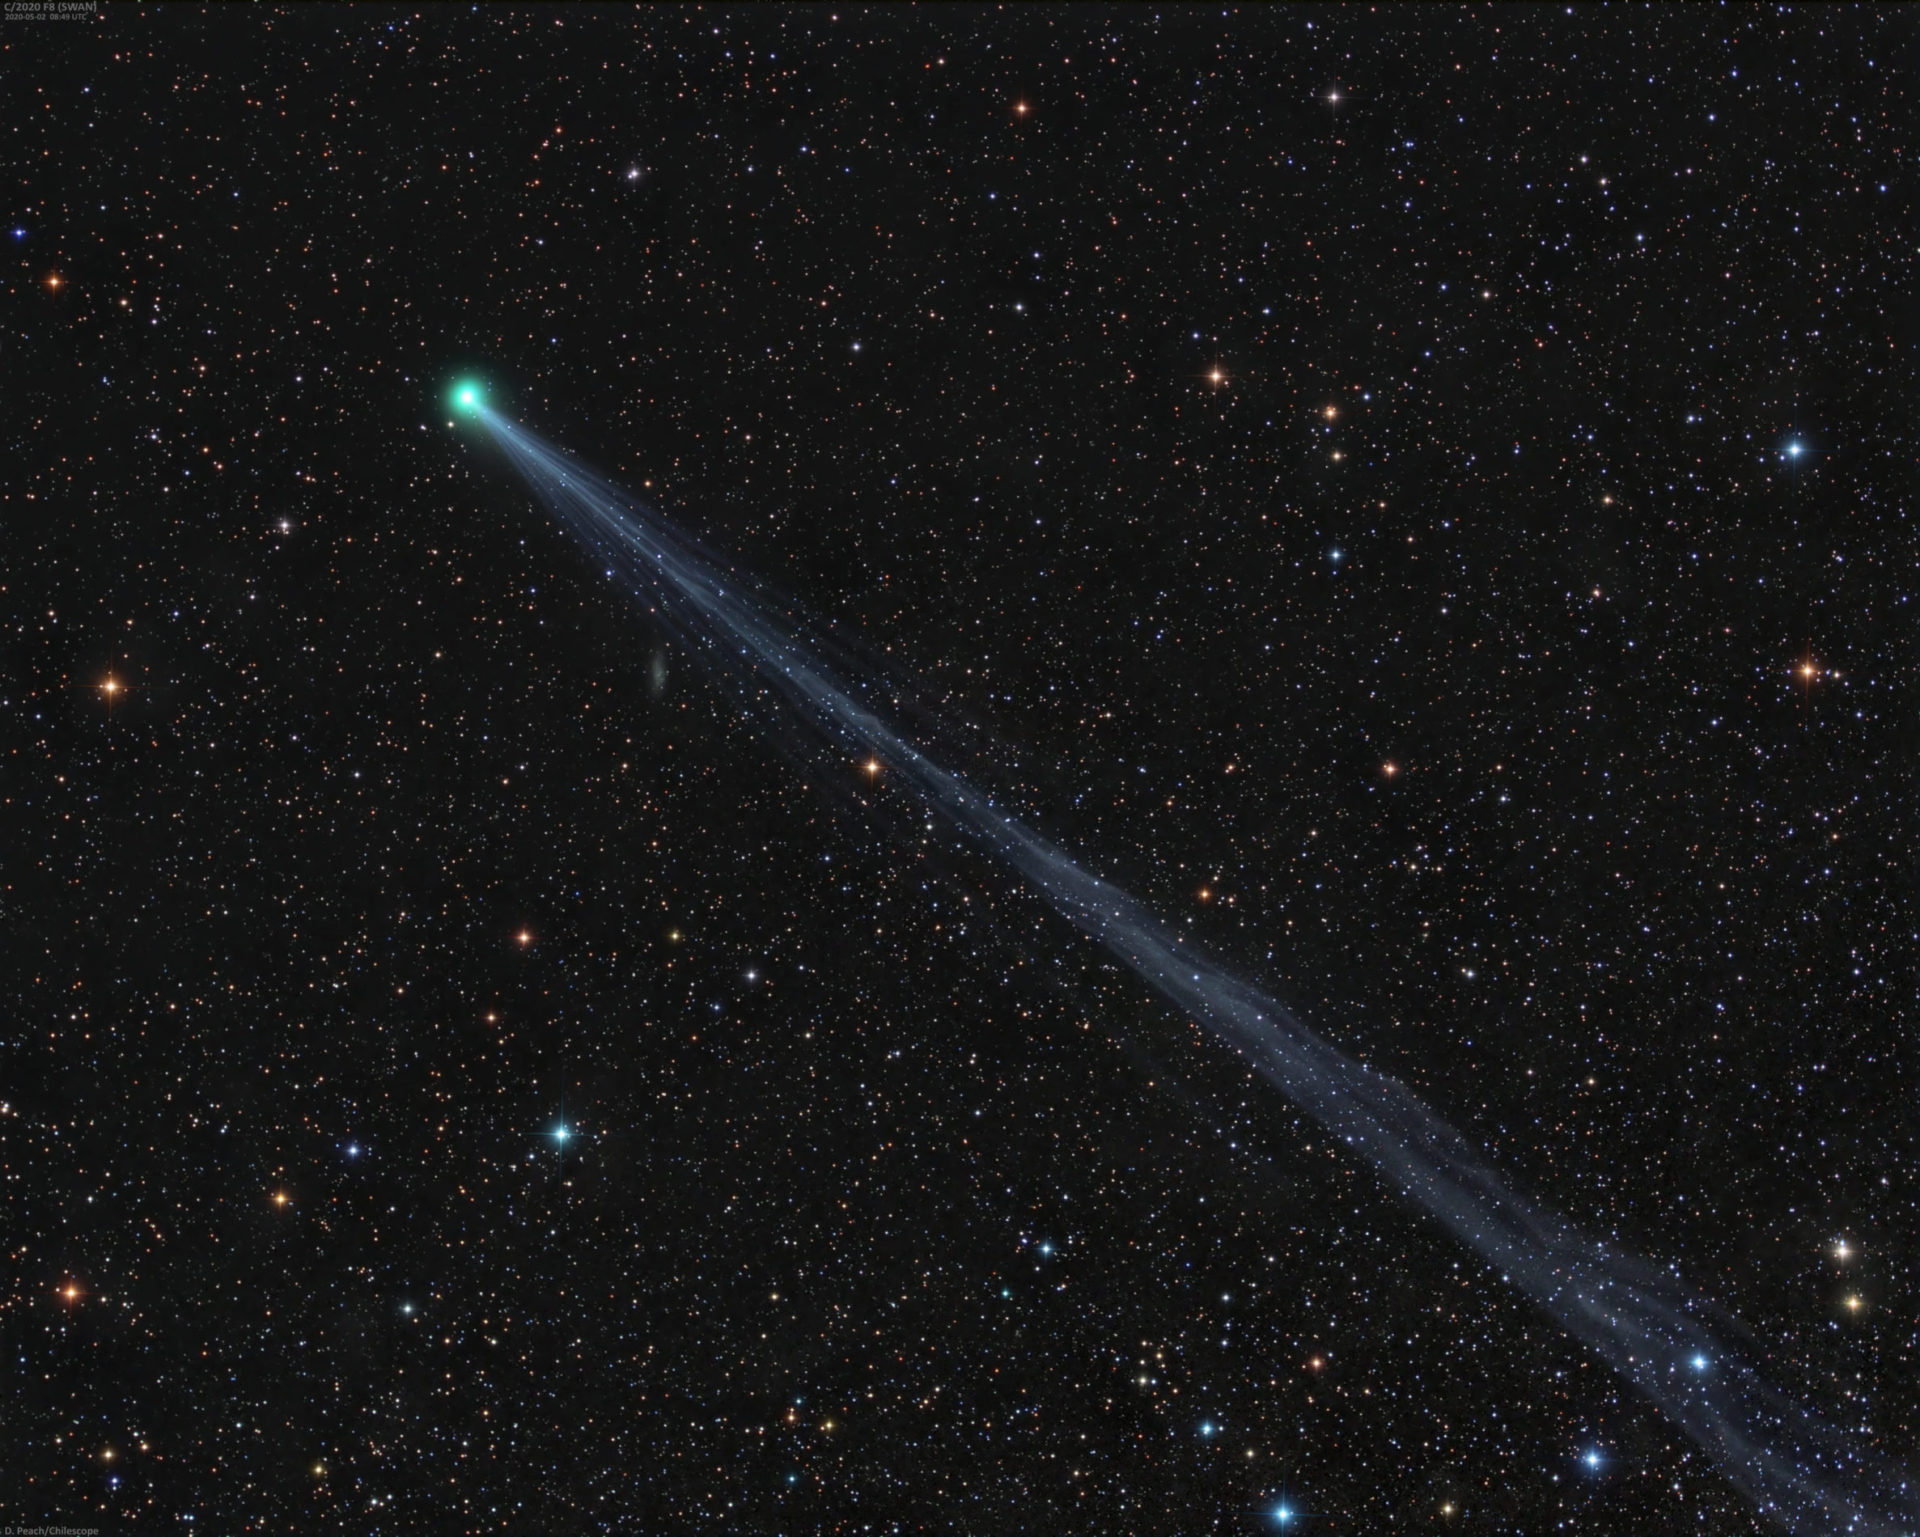 Comet SWAN in space with stars photographed by Damian Peach